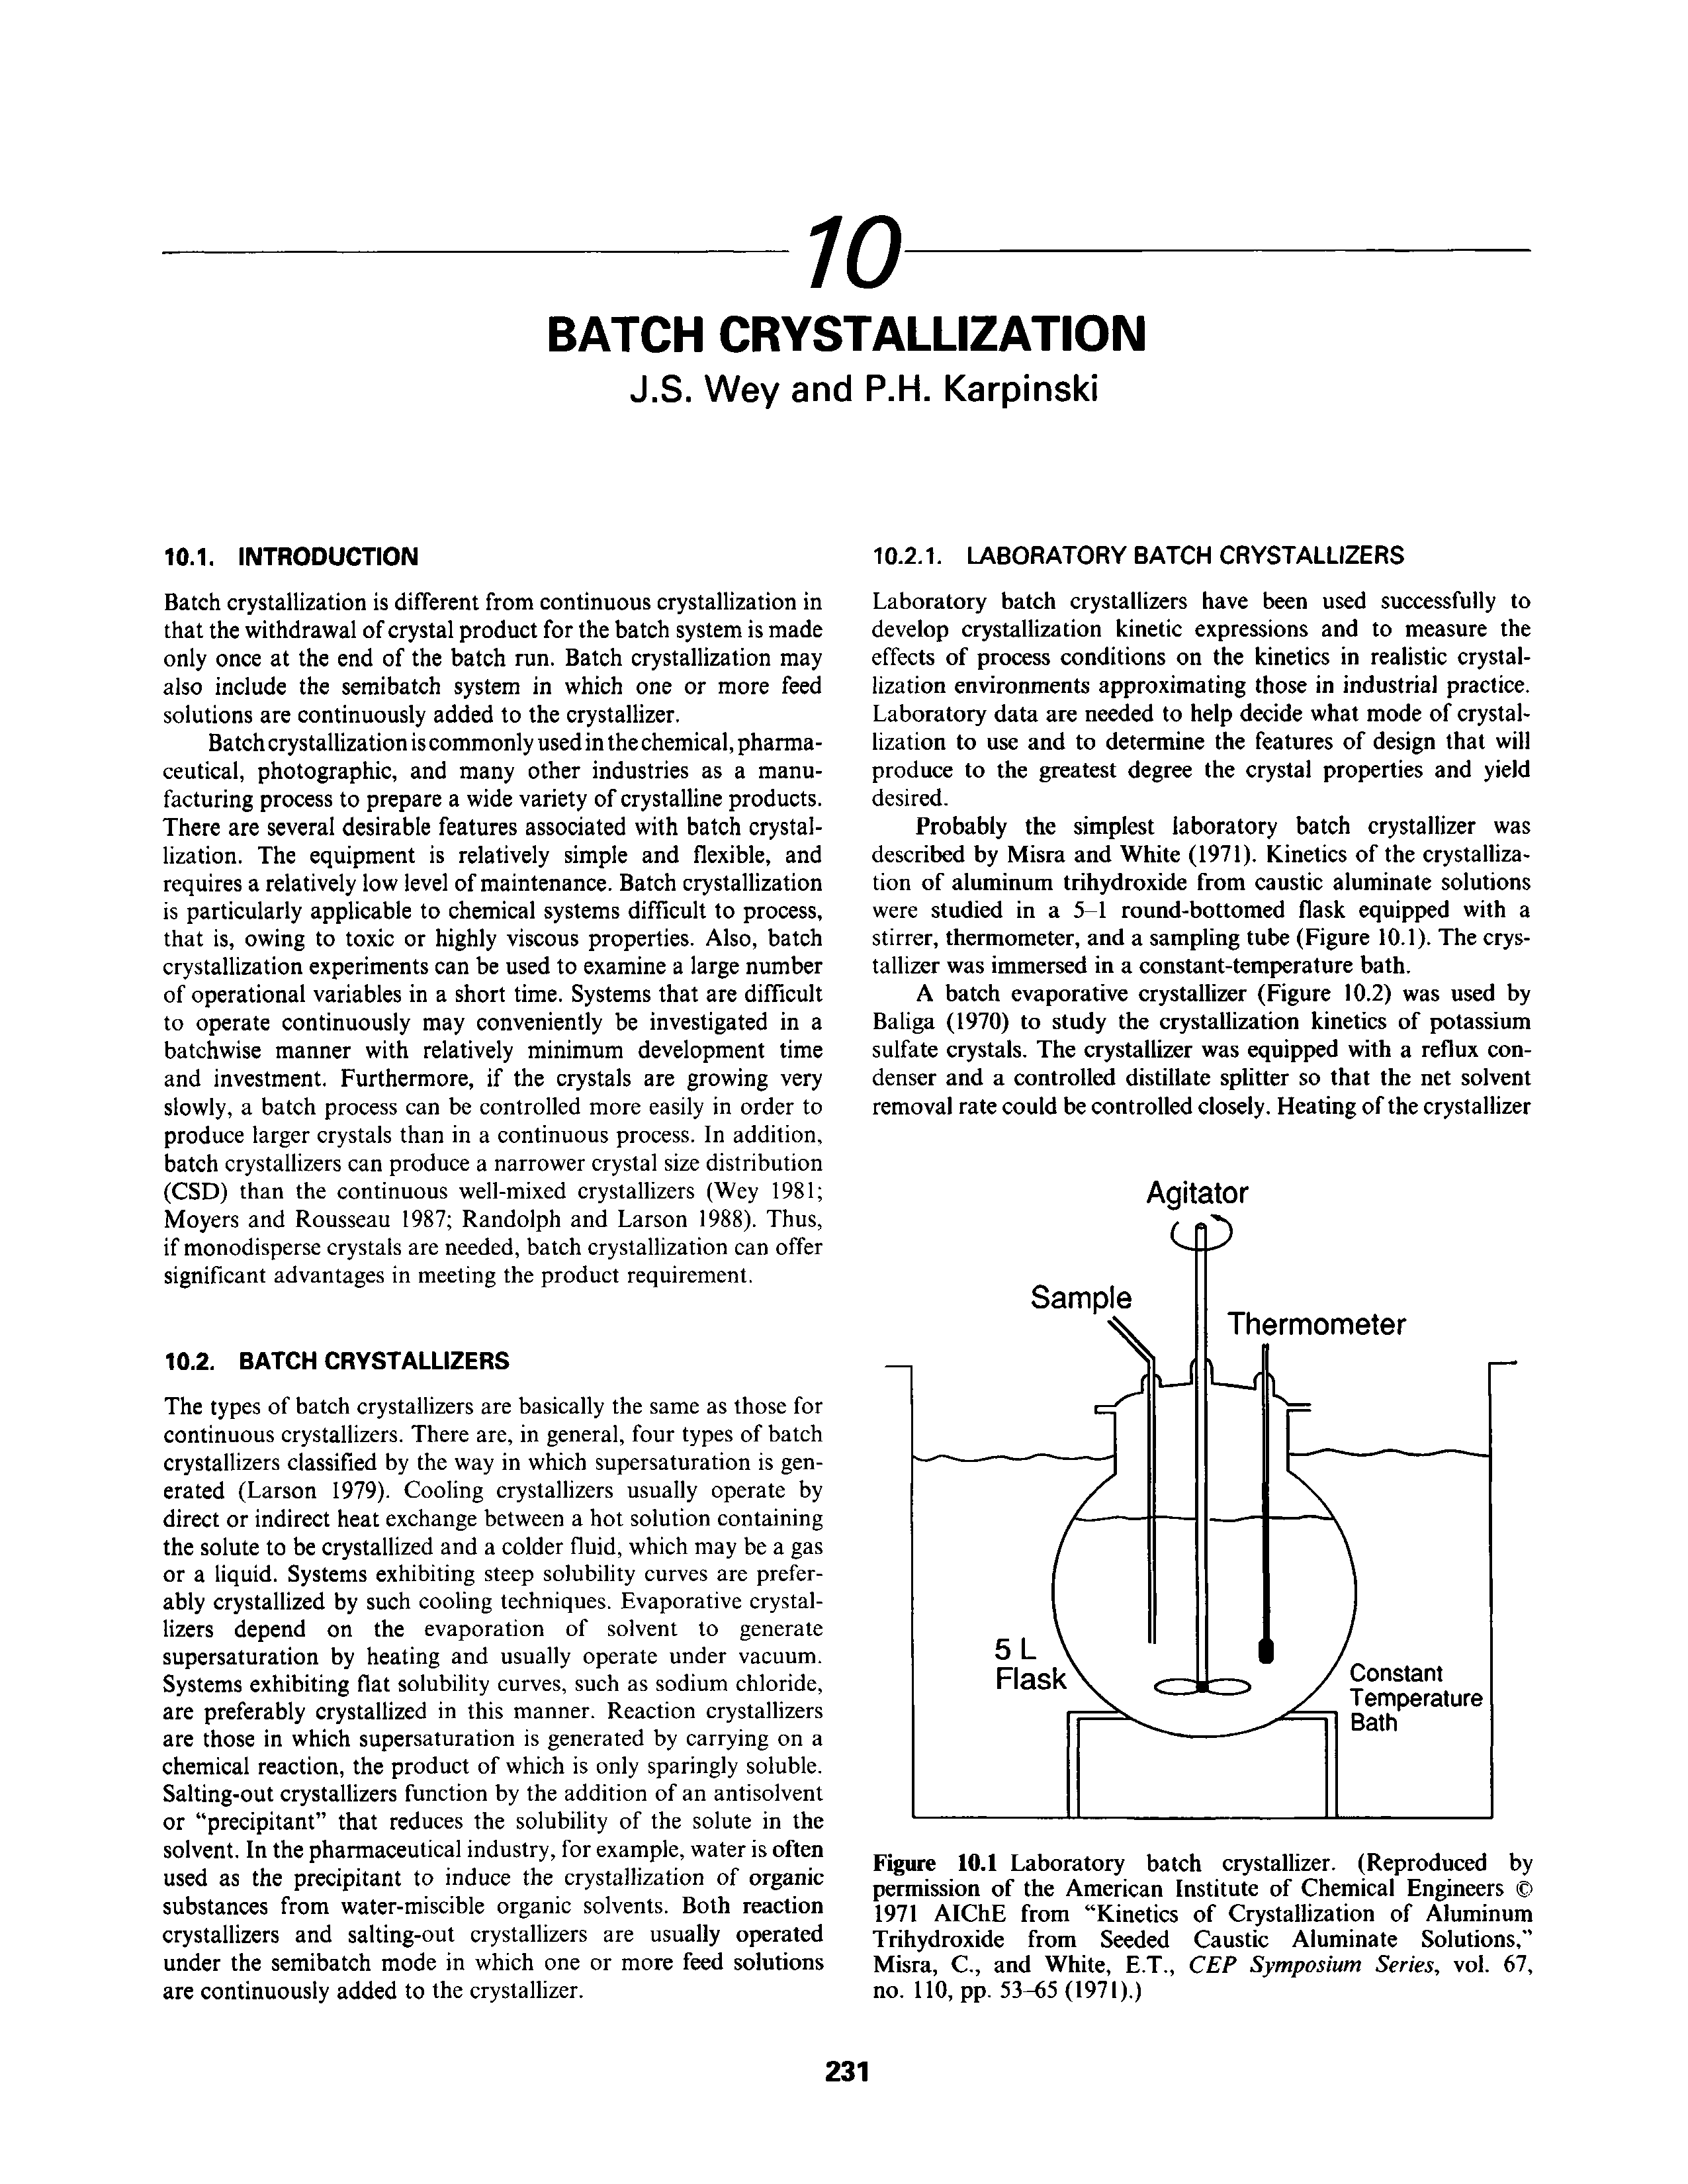 Figure 10.1 Laboratory batch crystallizer. (Reproduced by permission of the American Institute of Chemical Engineers 1971 AIChE from Kinetics of Crystallization of Aluminum Trihydroxide from Seeded Caustic Aluminate Solutions, Misra, C., and White, E.T., CEP Symposium Series, vol. 67, no. 110, pp. 53-65 (1971).)...